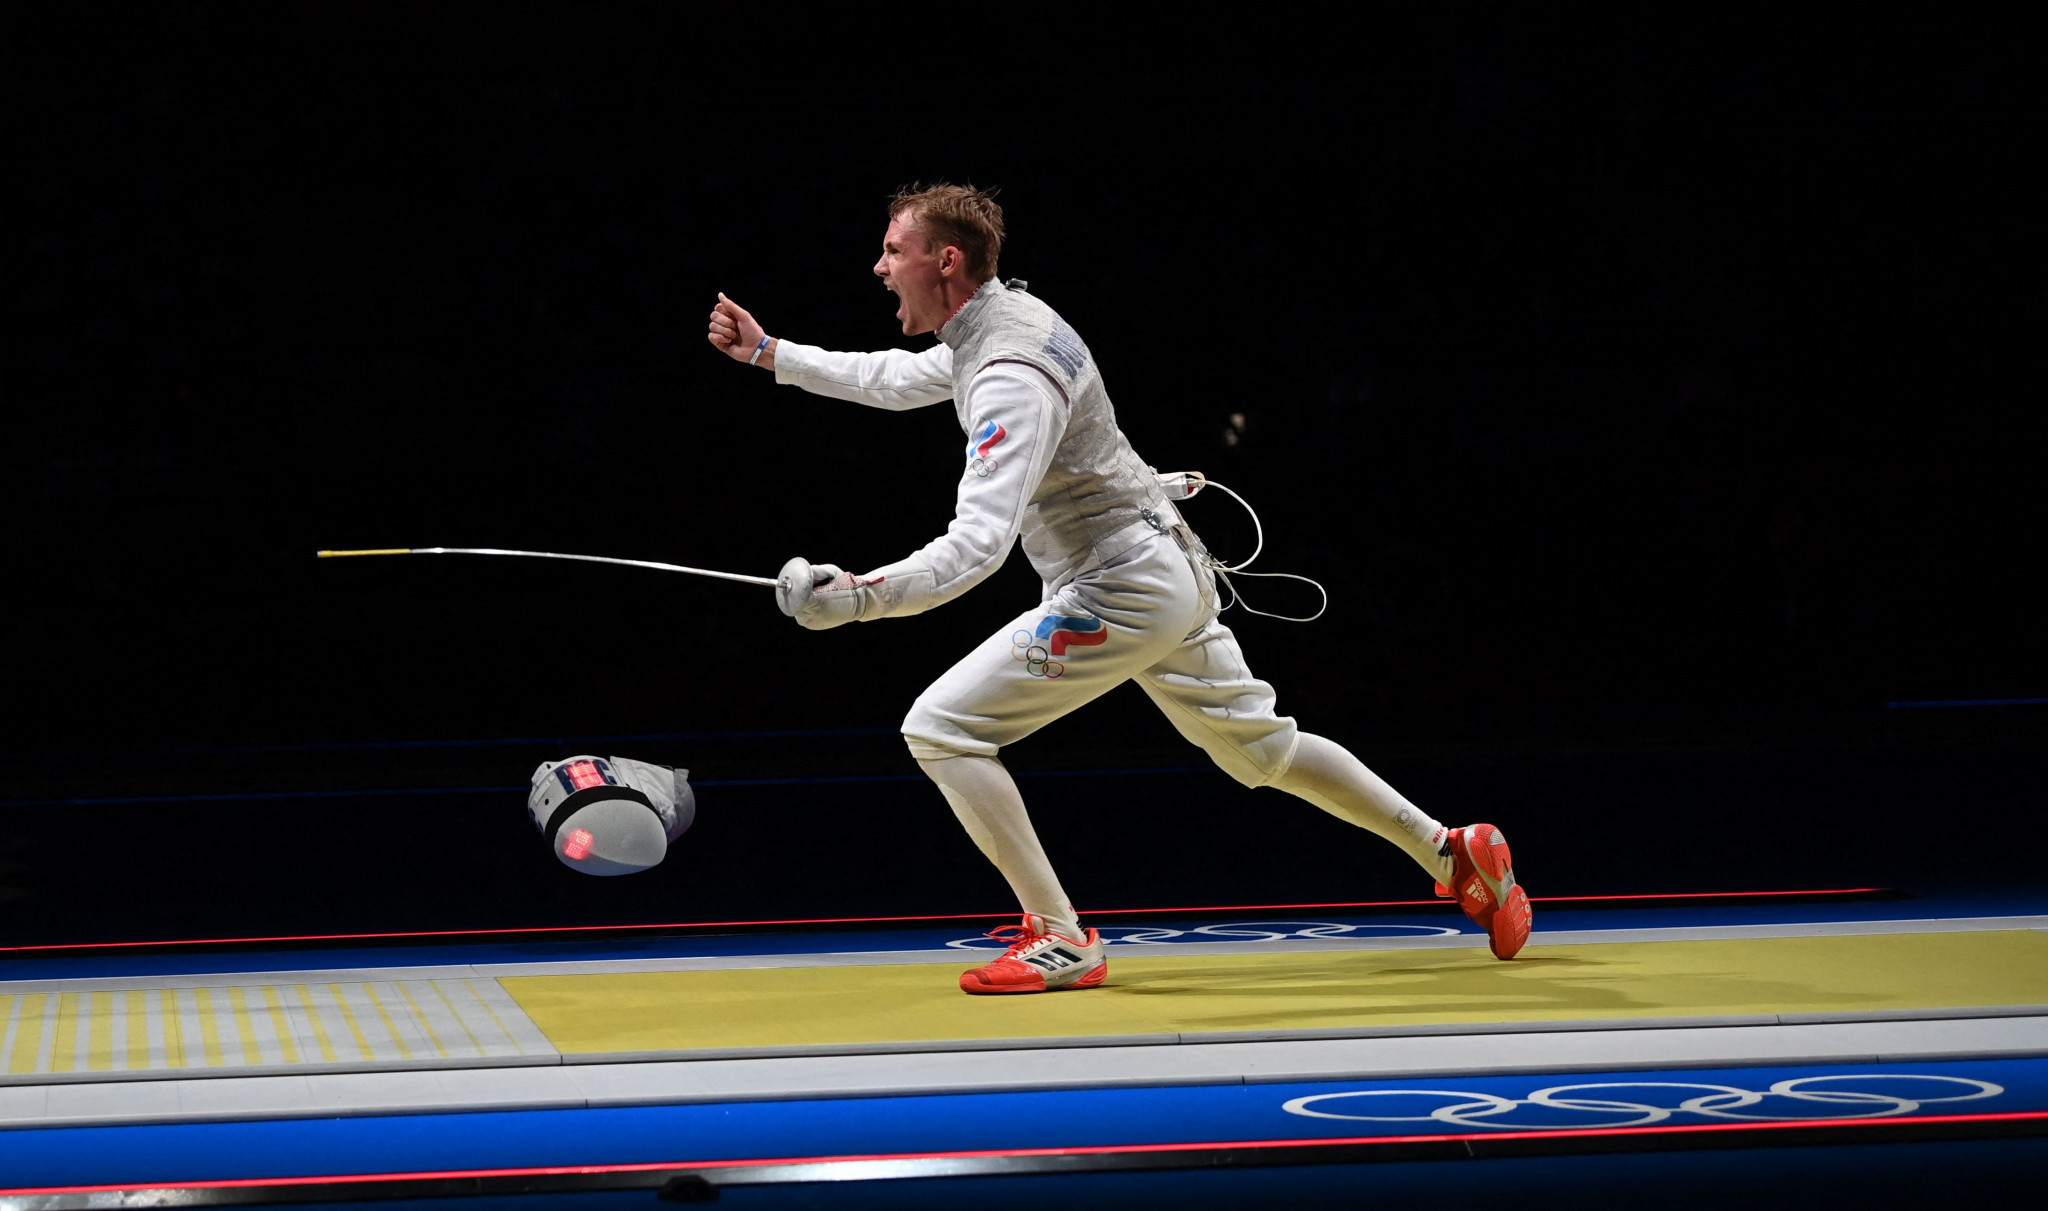 USA Fencing announces it will vote no to reinstatement of fencers and officials from Russia and Belarus